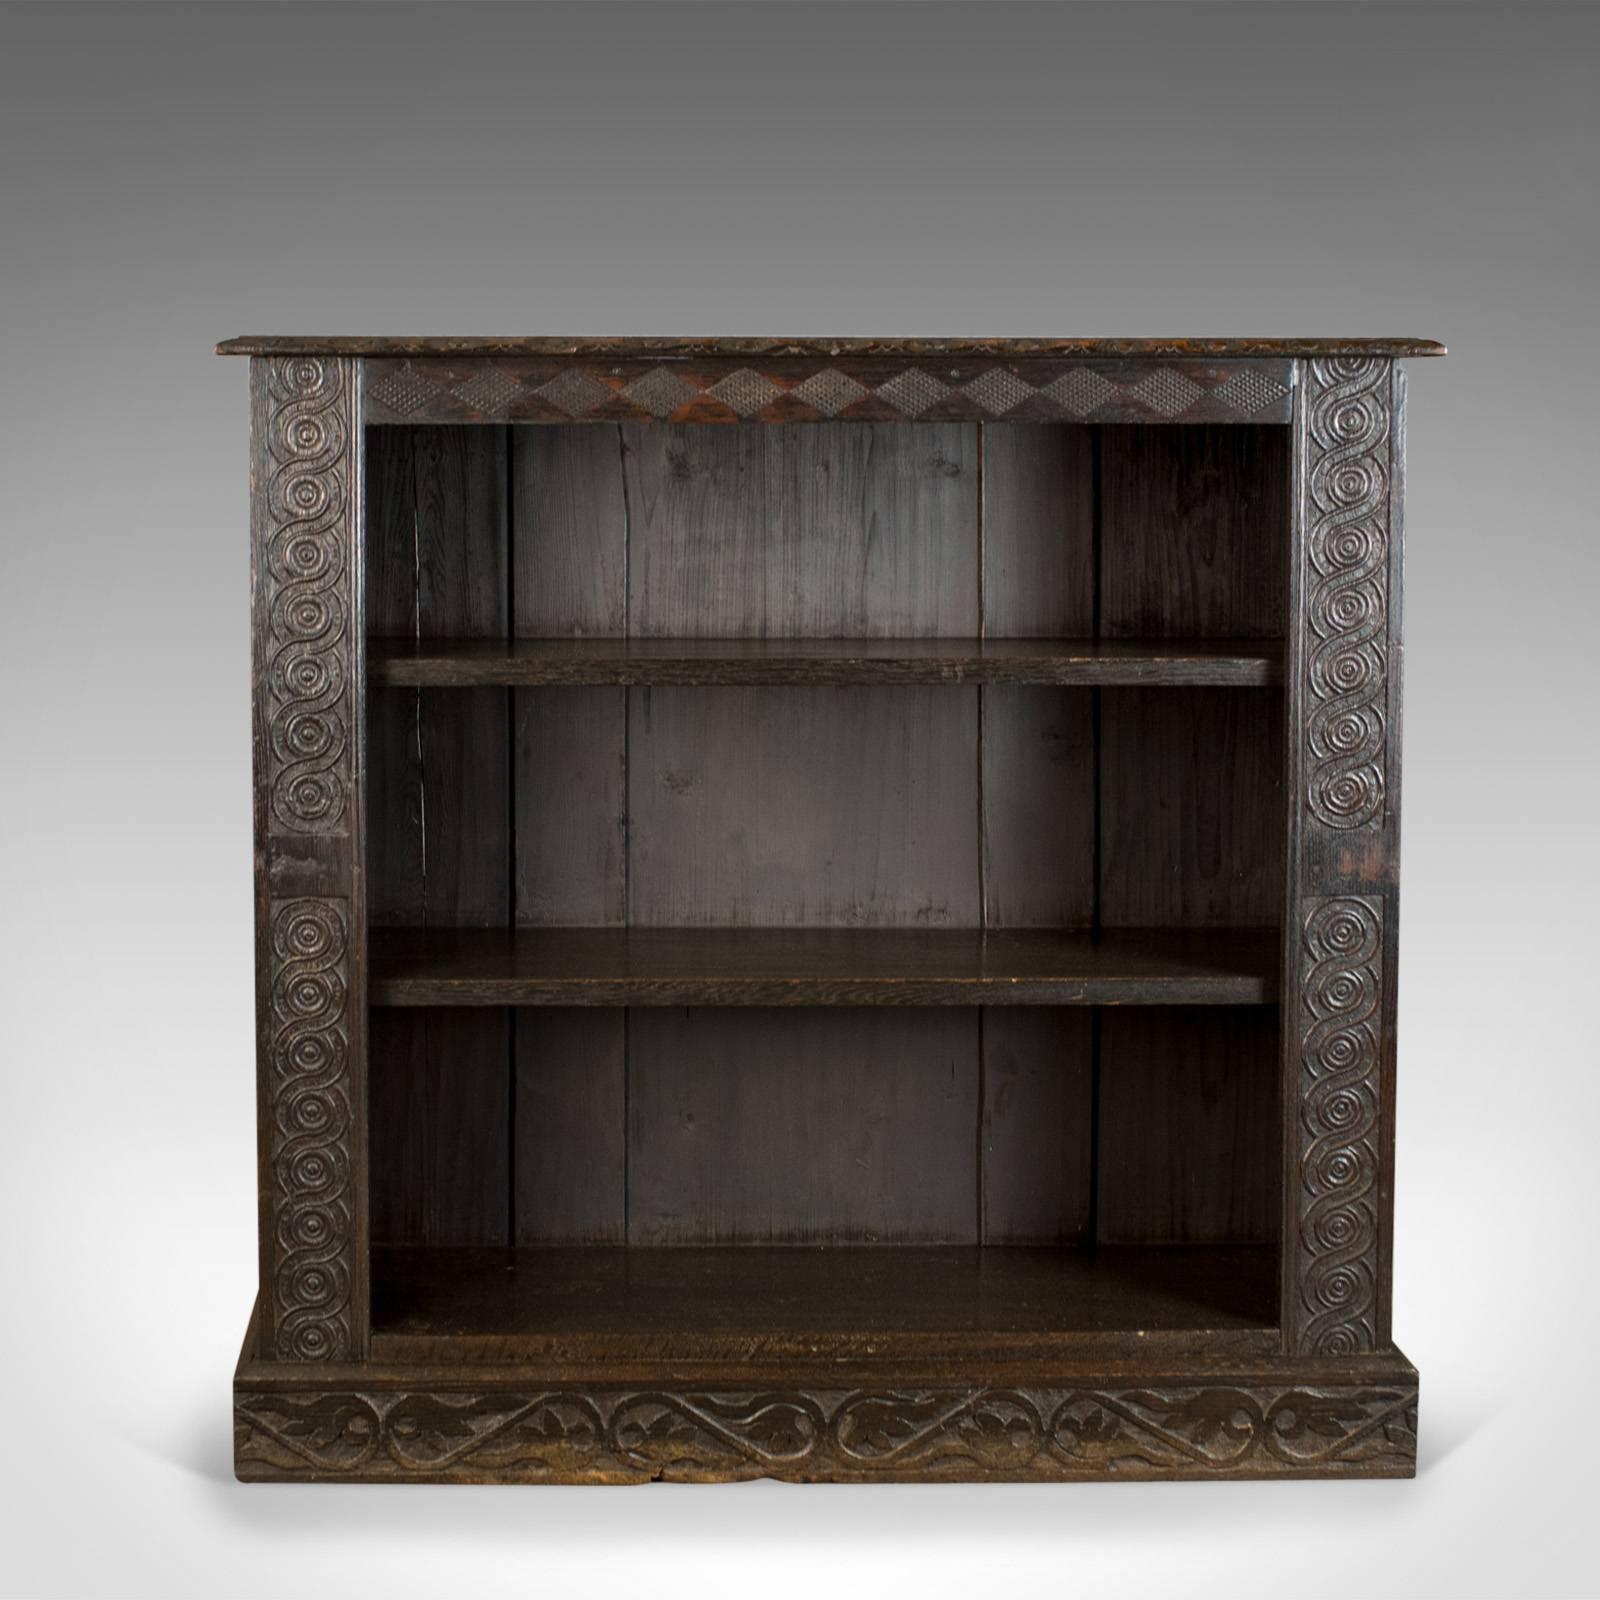 This is an antique bookshelf, an English oak, Victorian bookcase with Jacobean overtones dating to circa 1880.

Mid-sized bookshelf with a dark oak finish
Desirable aged patina and displaying Jacobean overtones
Pair of fixed shelves offering 24